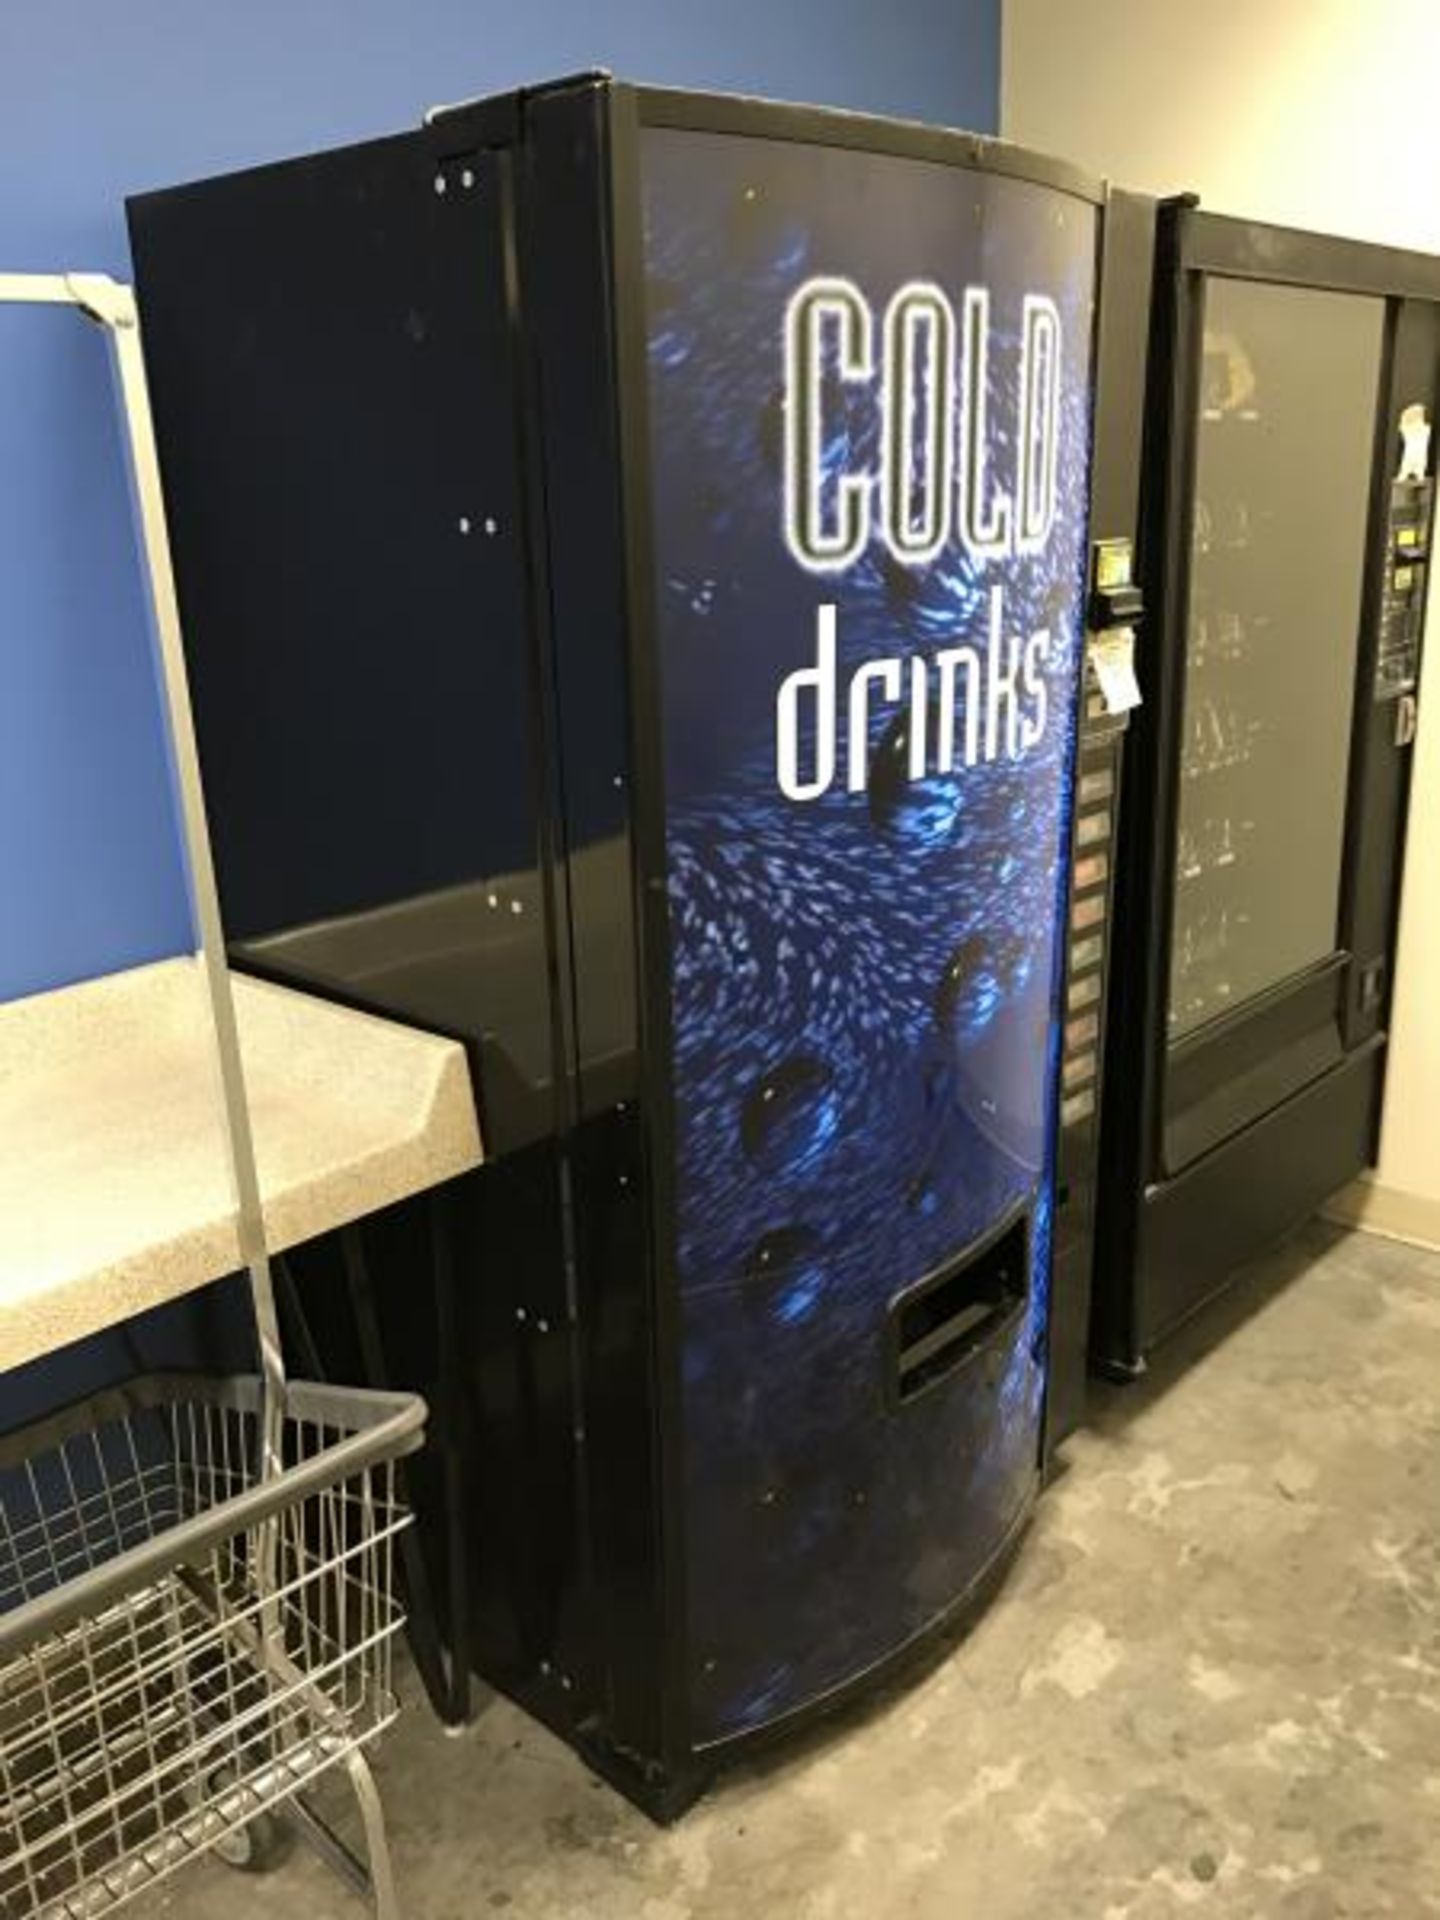 Cold Drink Machine, Refrigeration Works, Needs New Coin Box New Coin Box